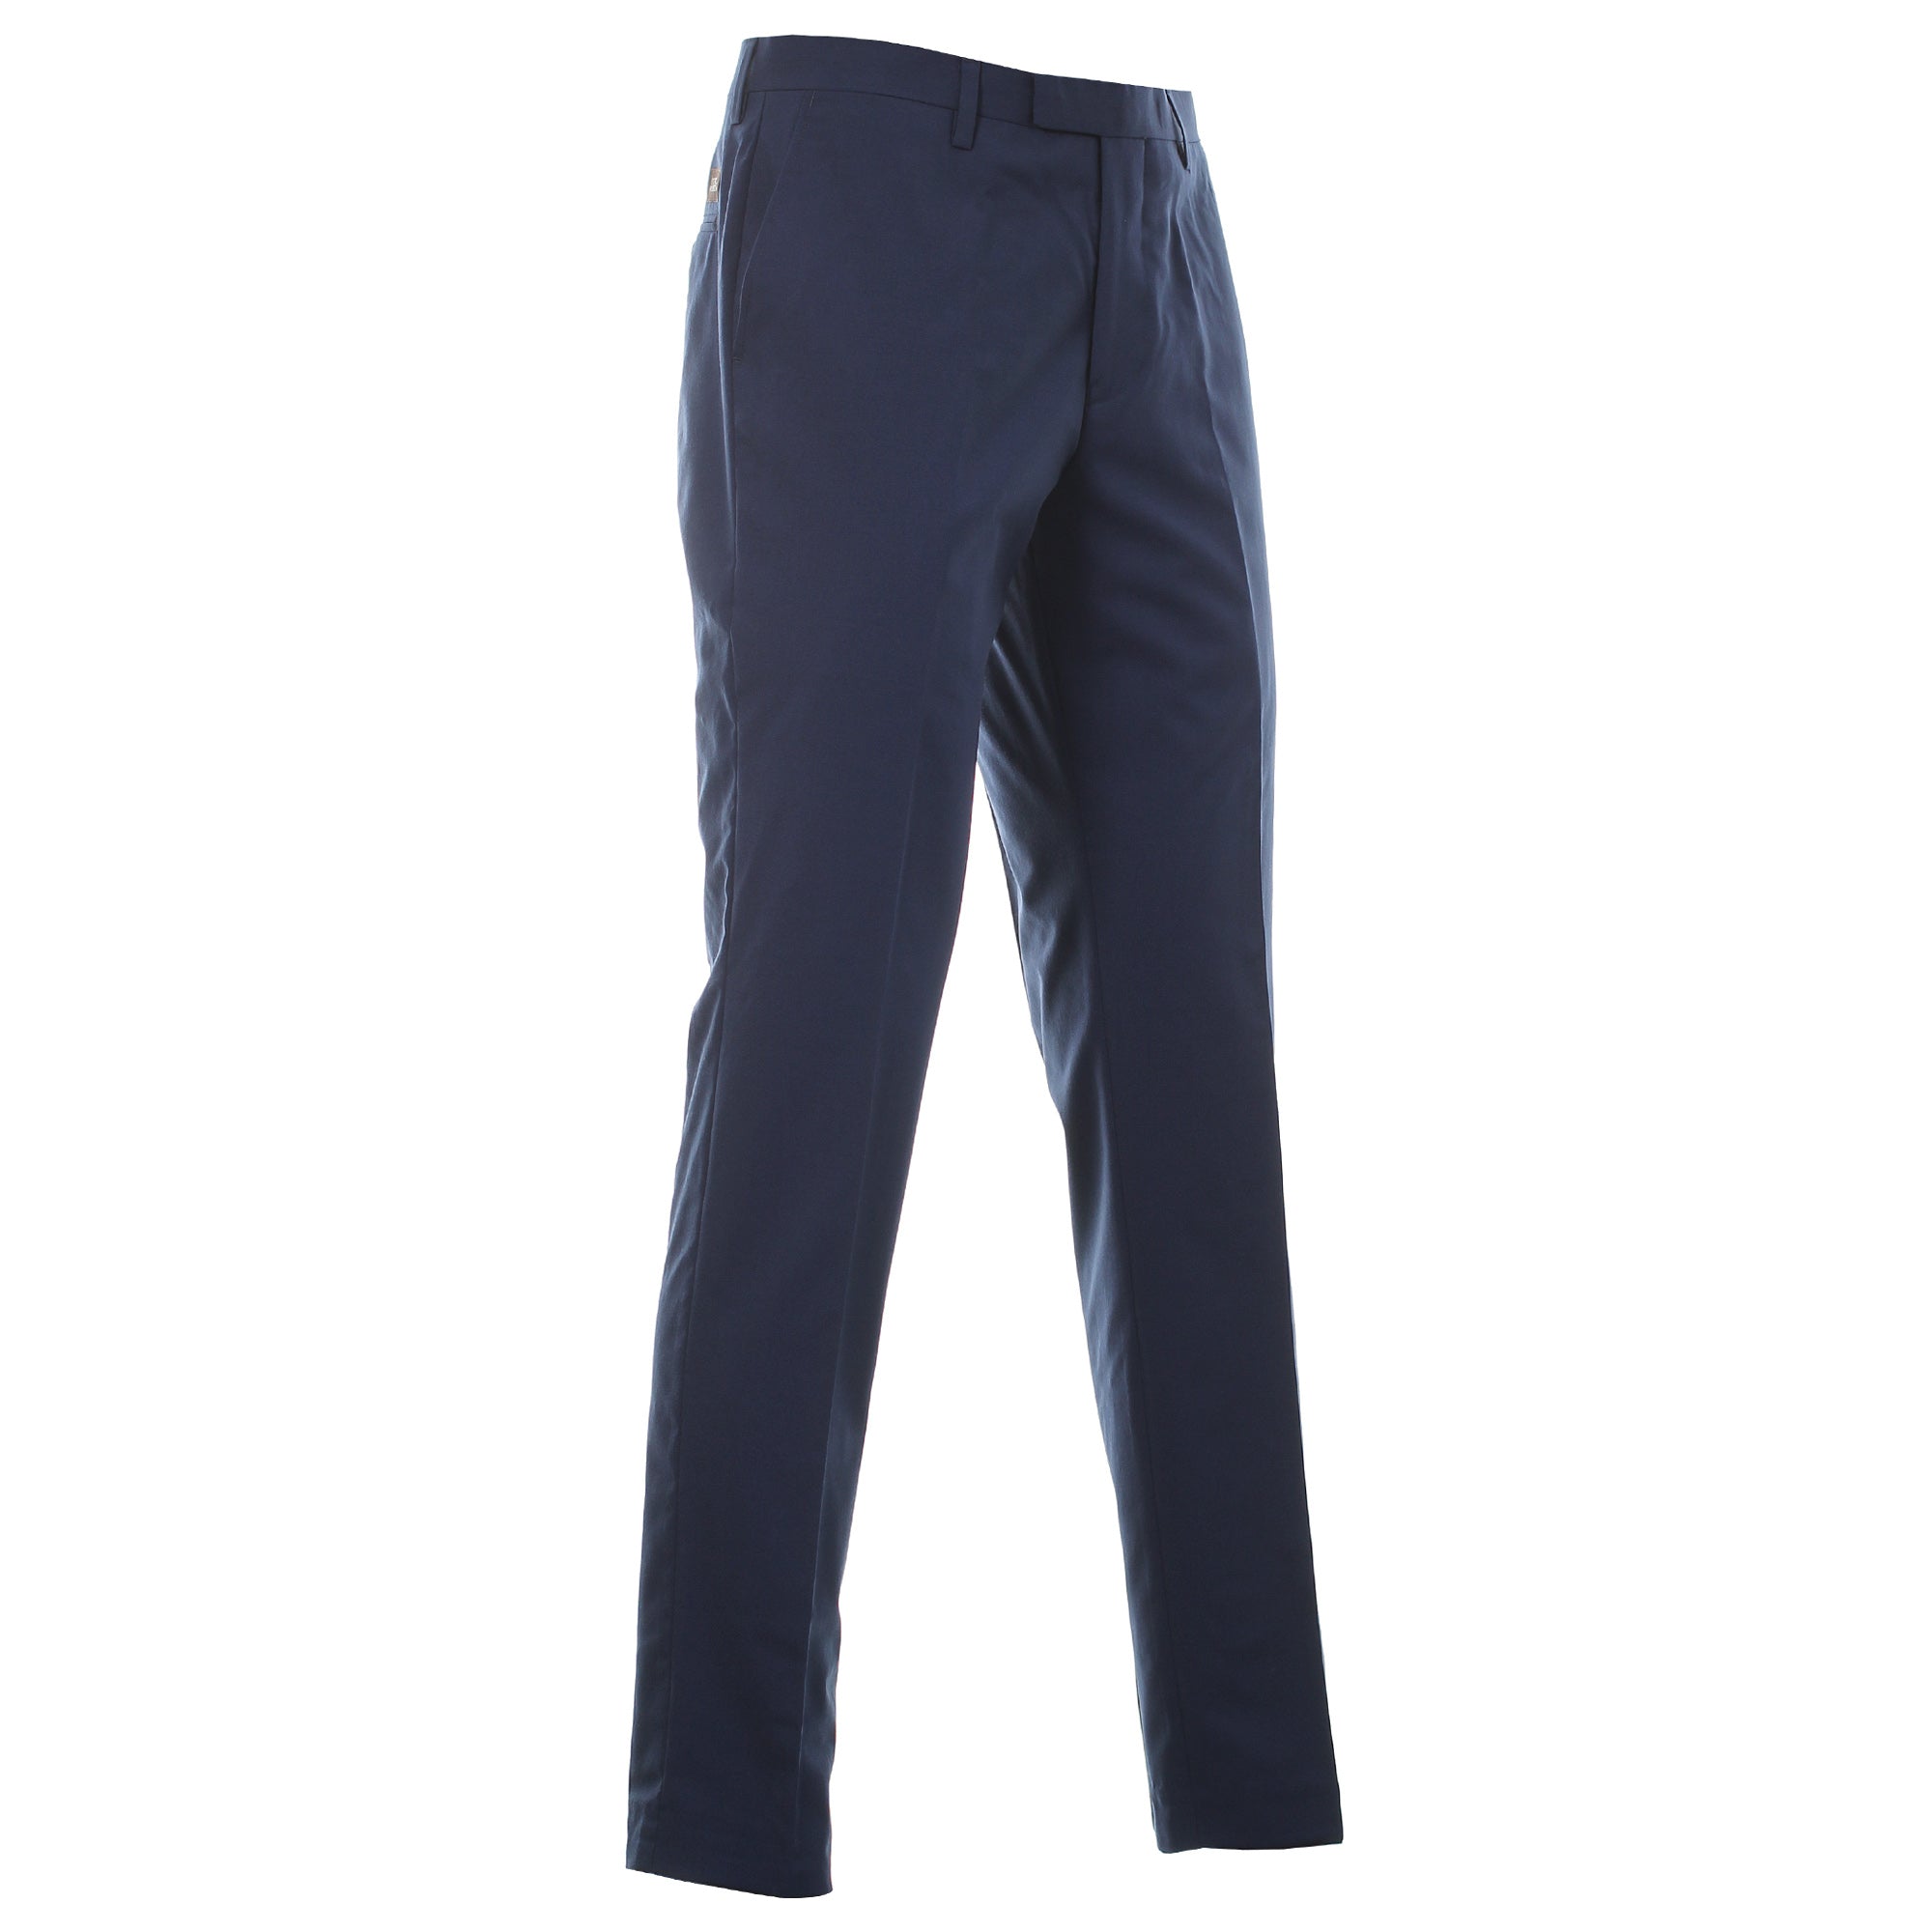 Oscar Jacobson Dave Trousers OJTRS0001 Navy | Function18 | Restrictedgs